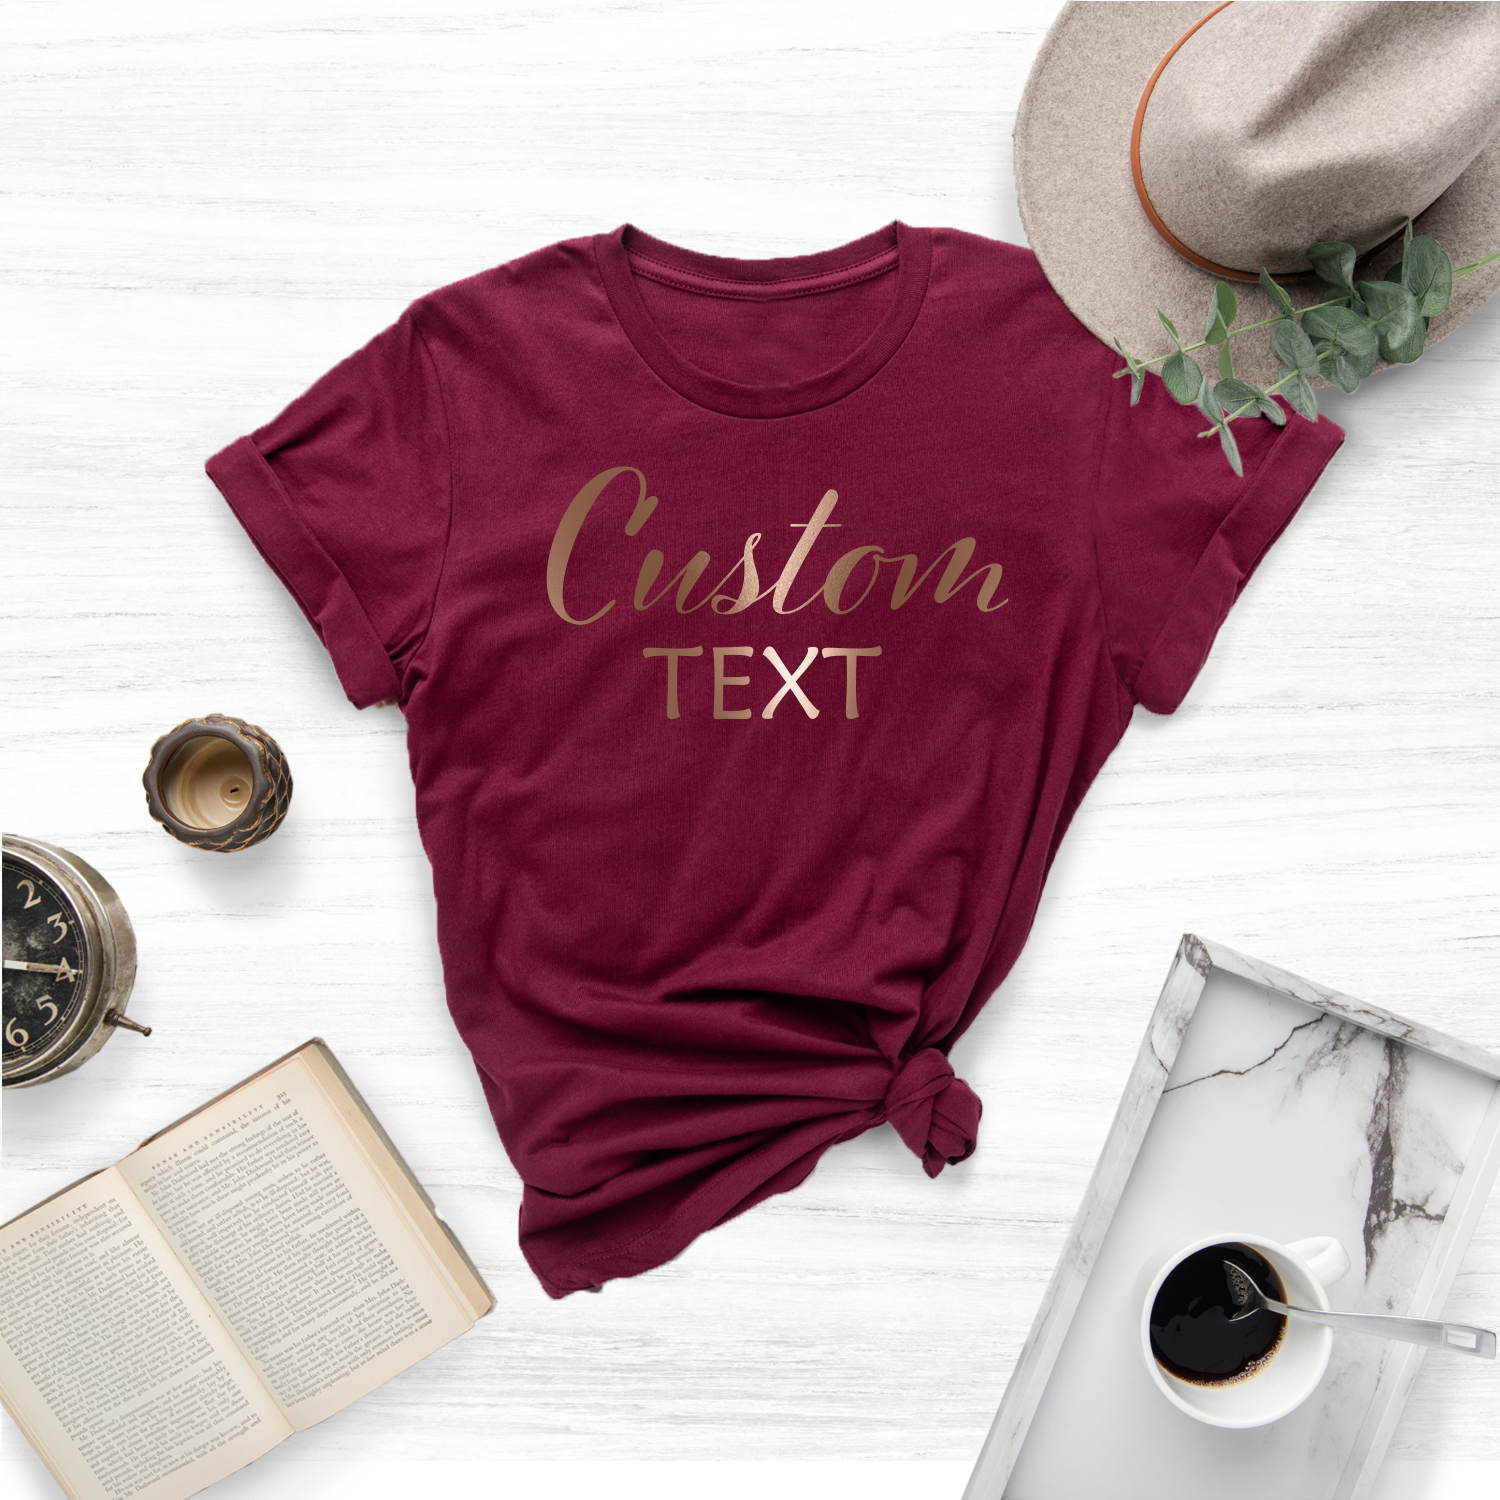 Your message, your style, your custom tee."  "Create a one-of-a-kind T-shirt with your own text."